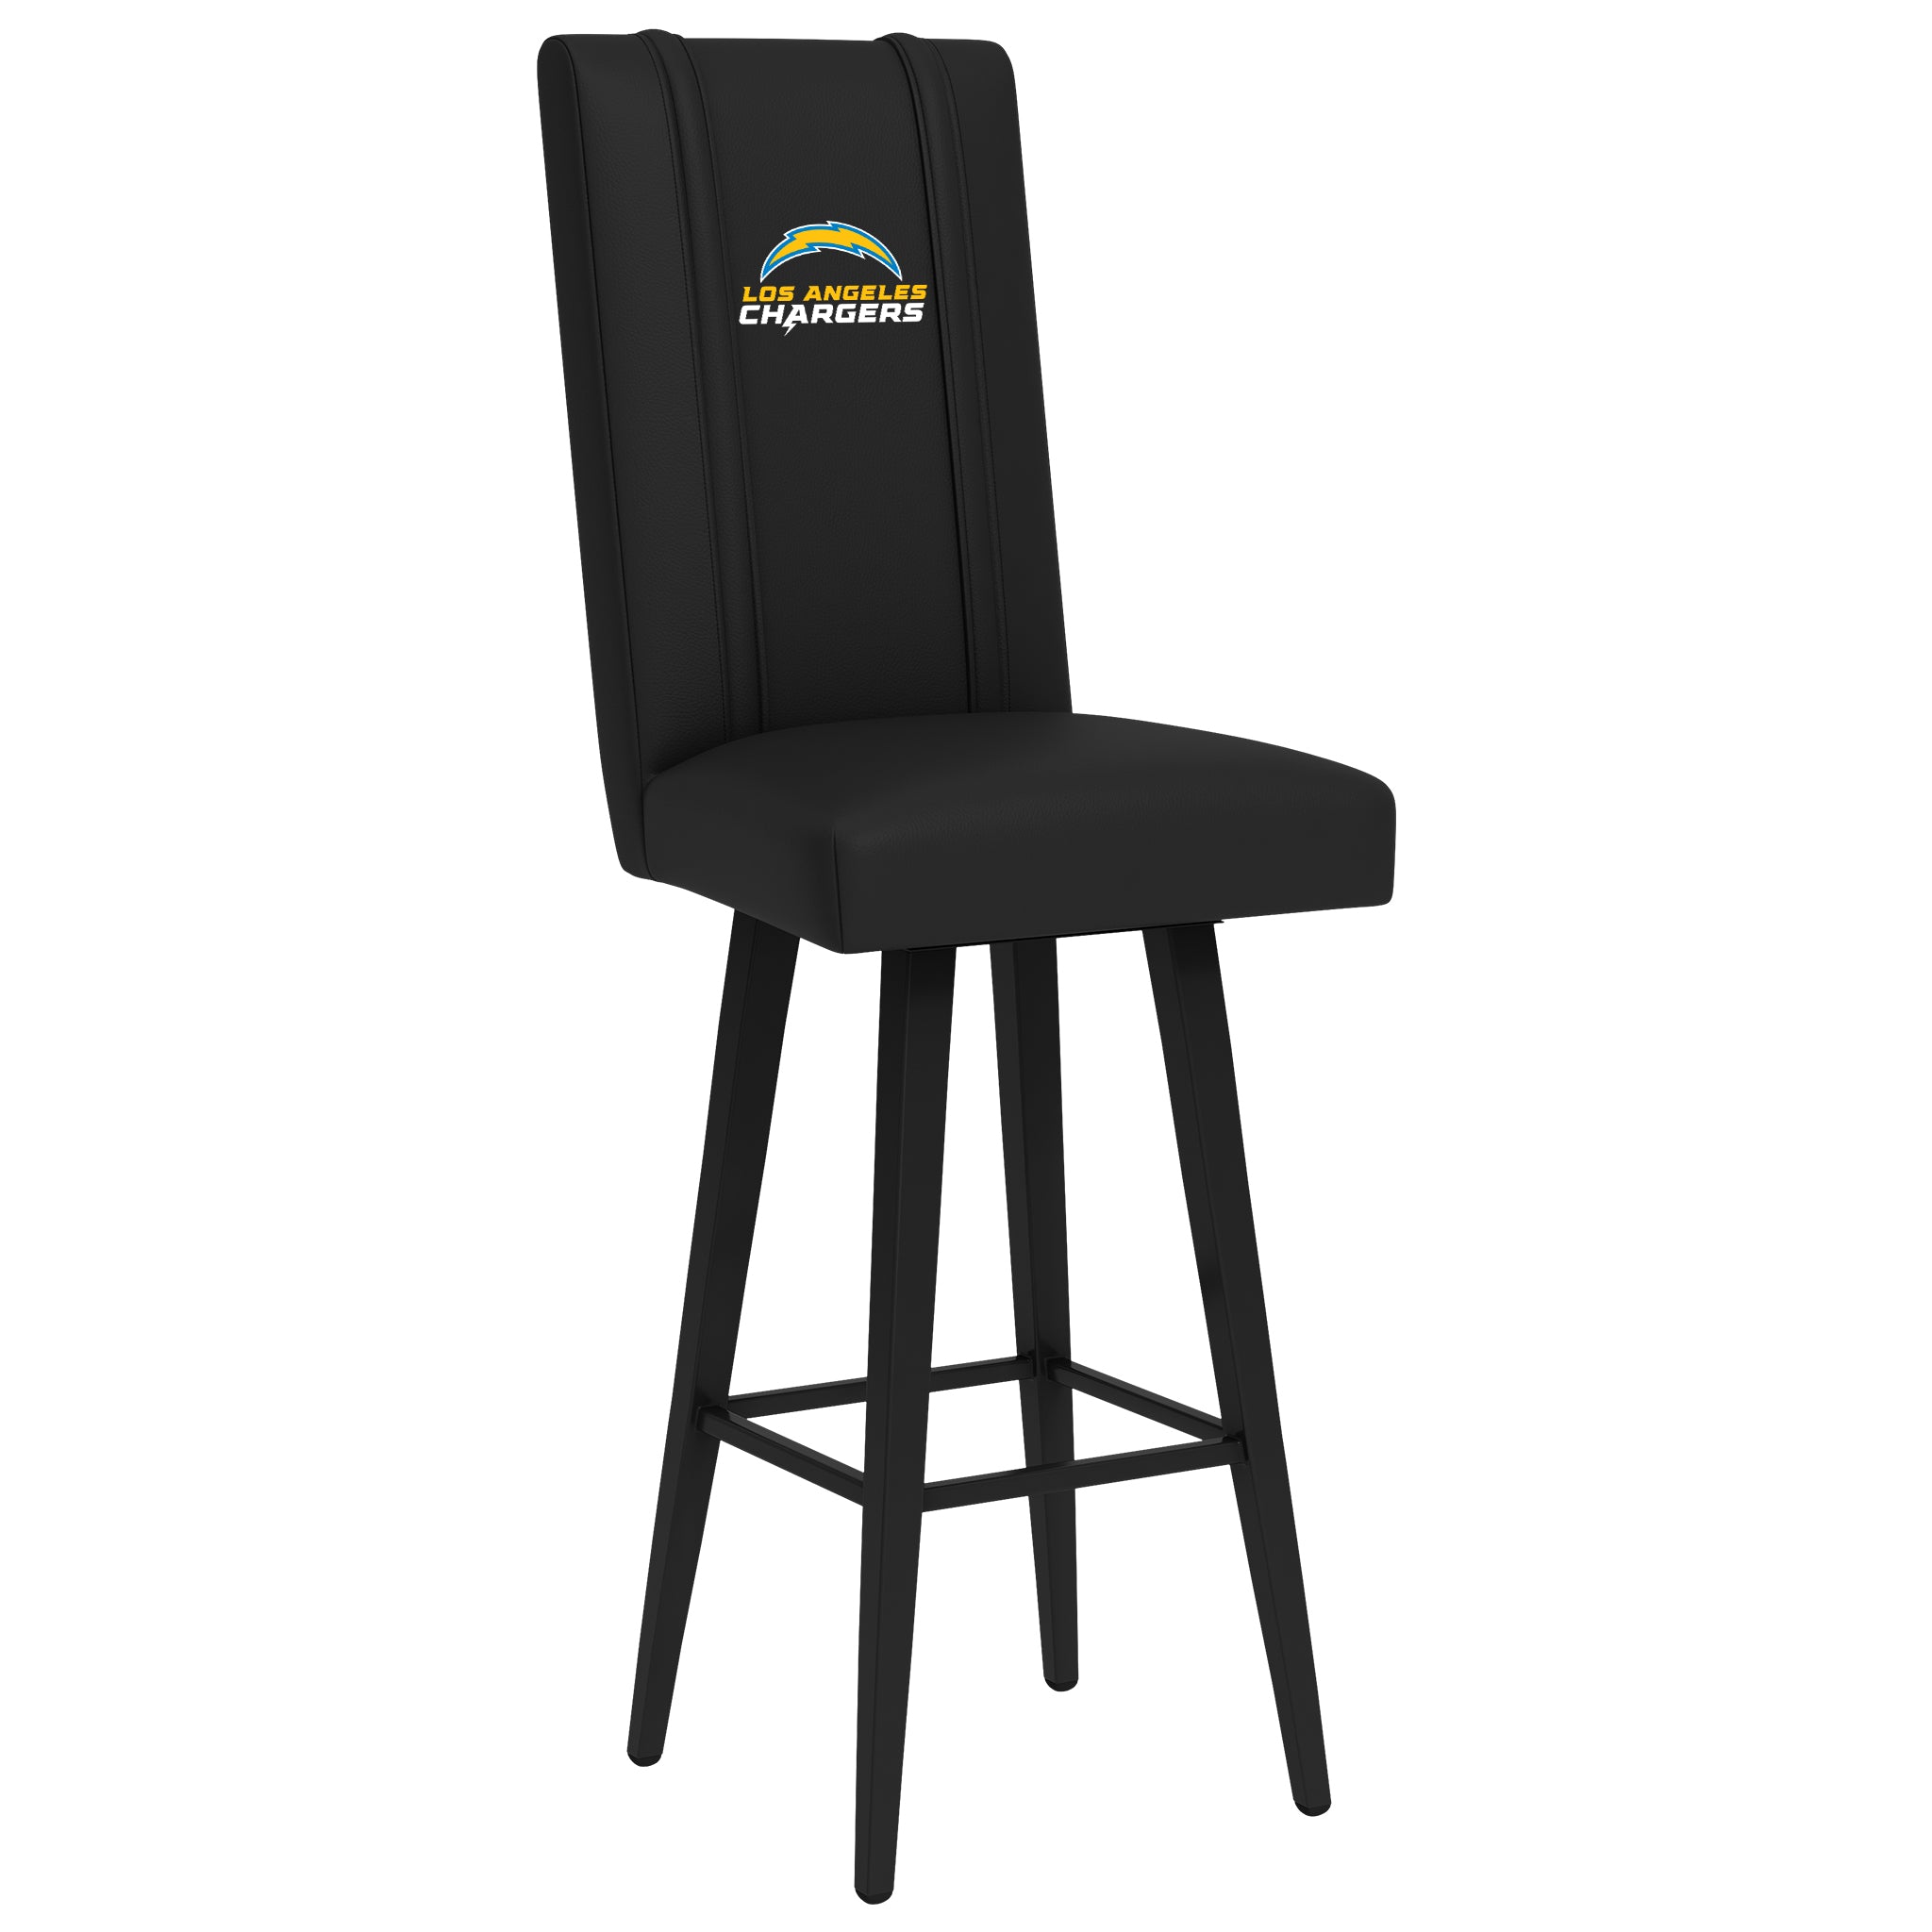 Los Angeles Chargers Swivel Bar Stool - Chair - Furniture - Kitchen